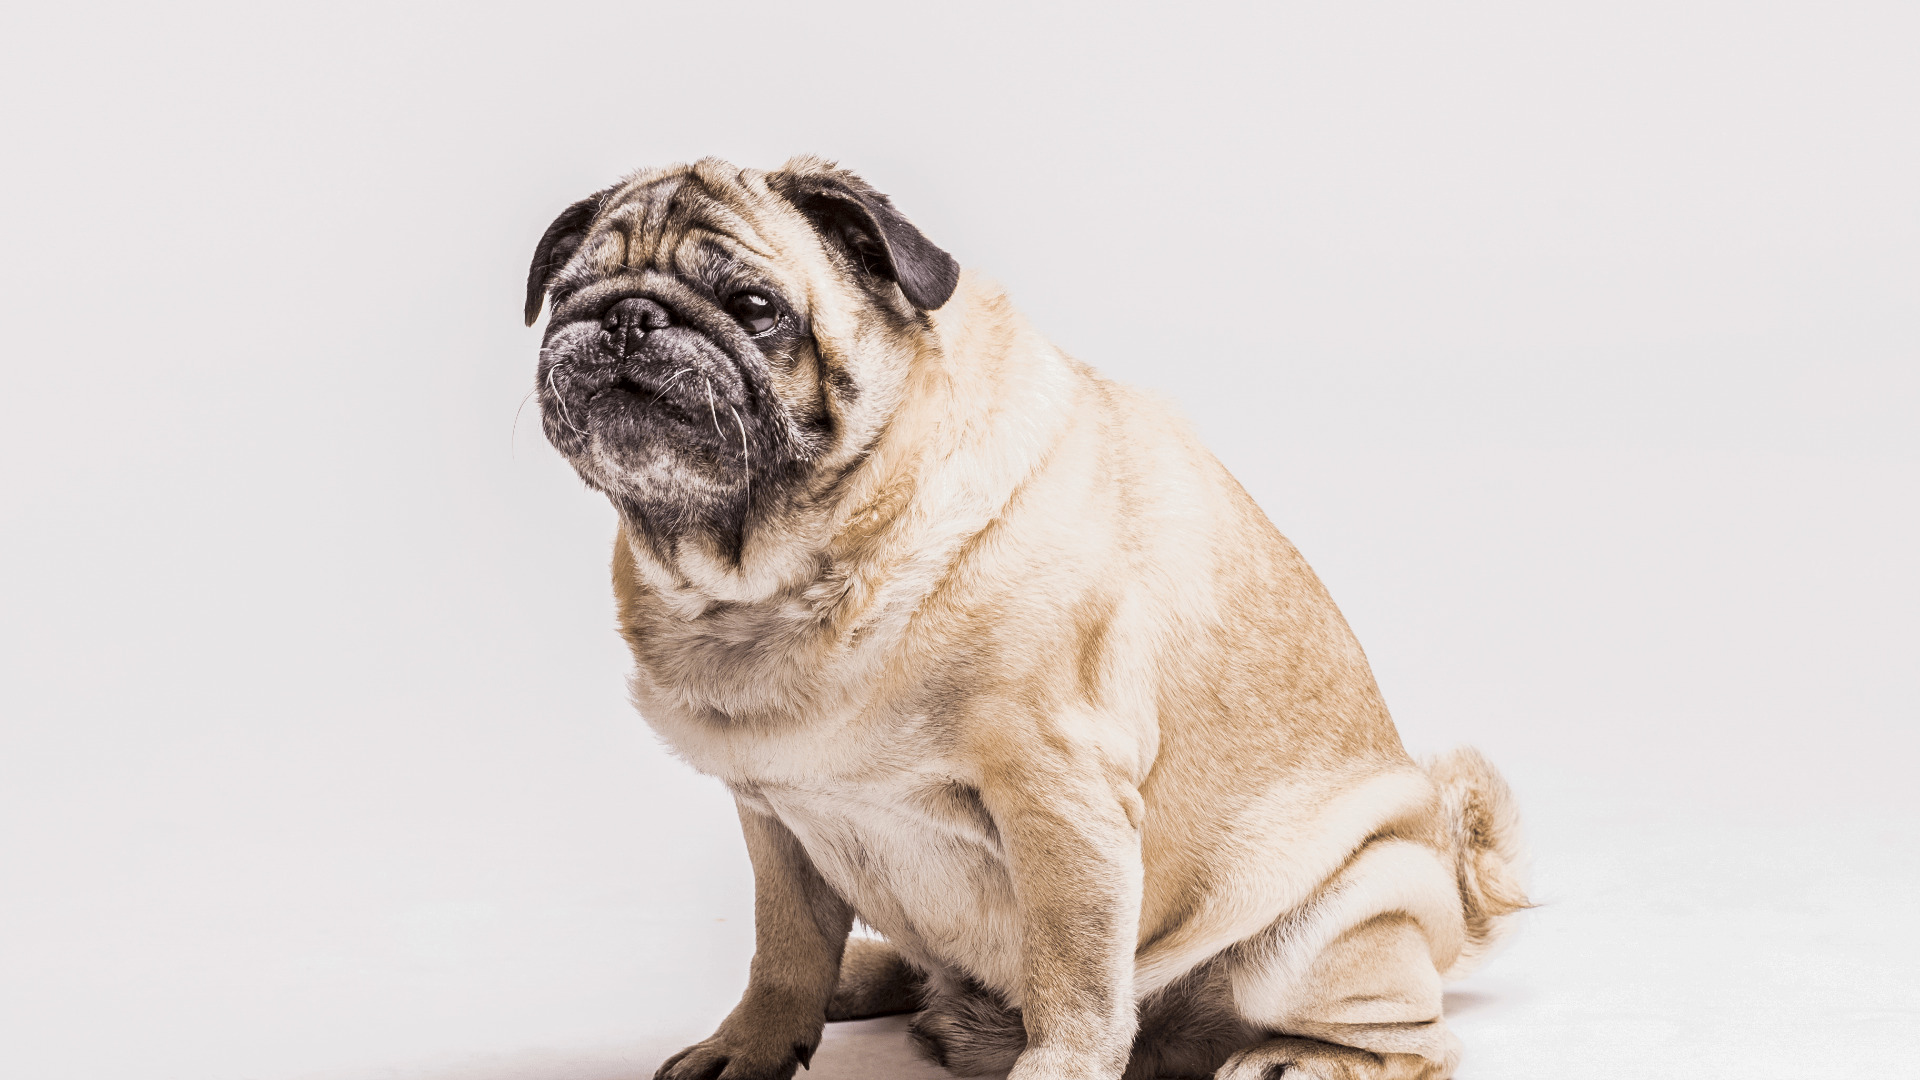 overfeeding always leads to weight issues in dogs